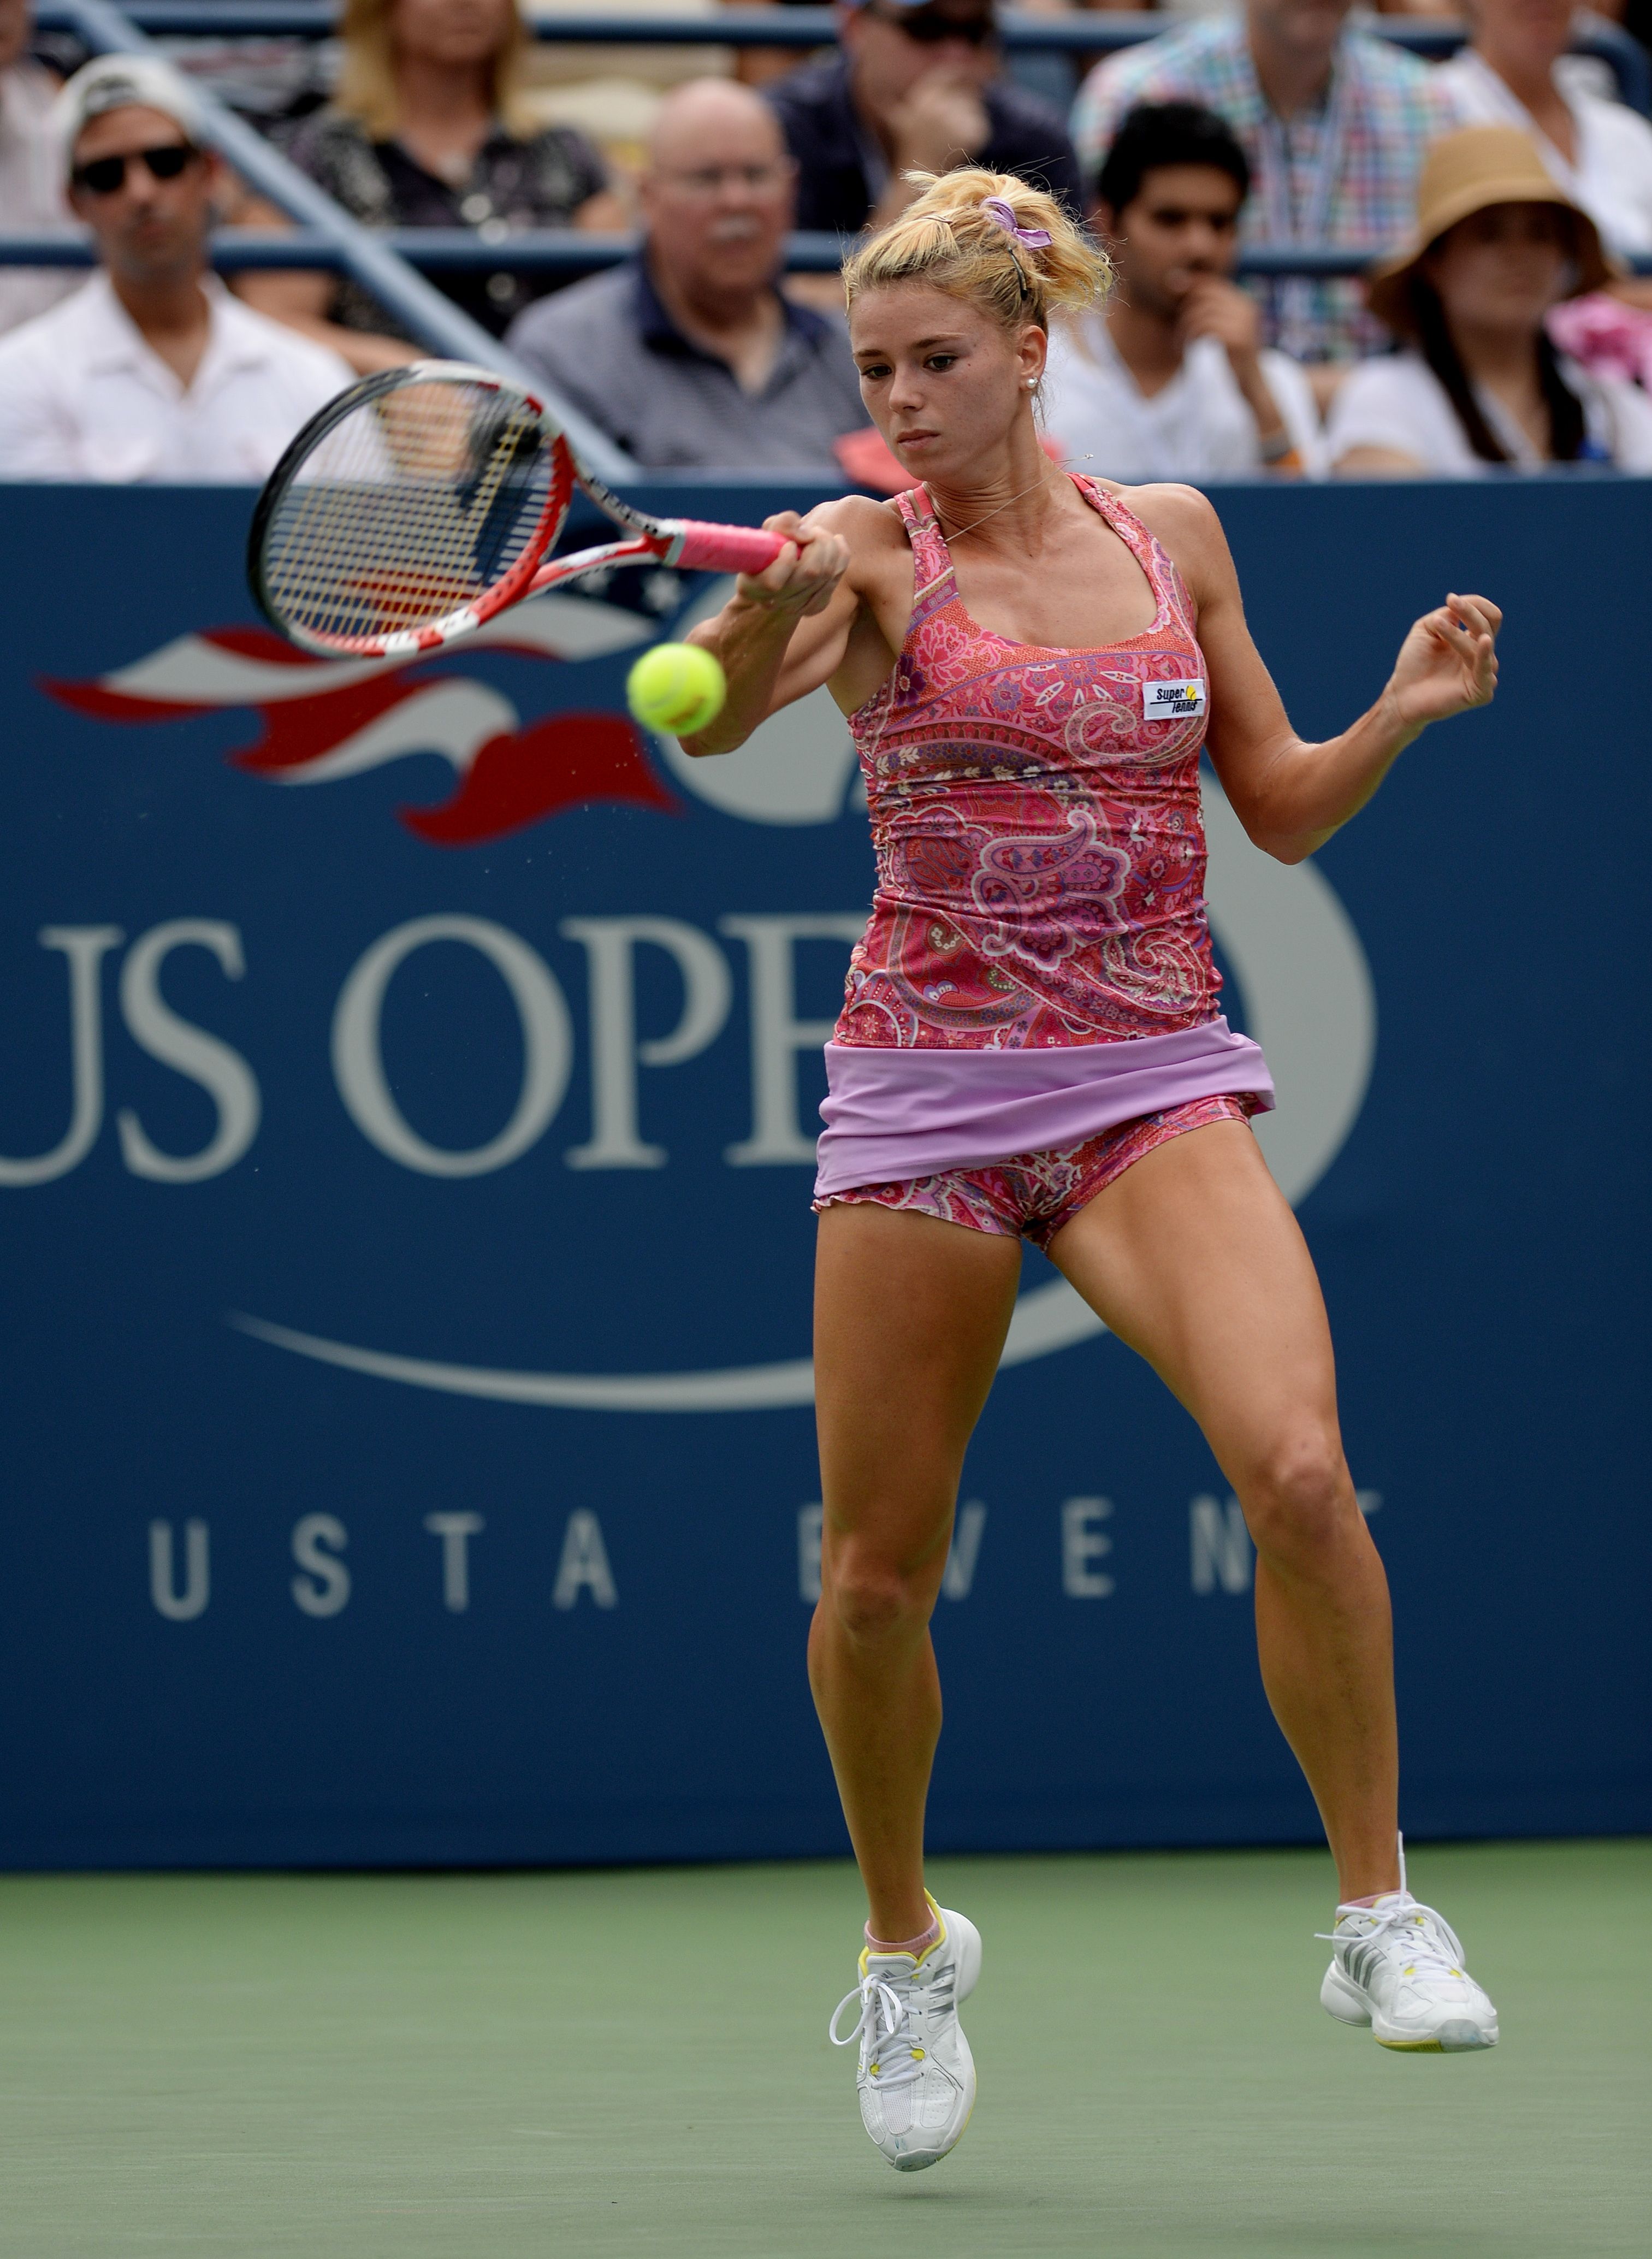 best wallpaper image about Camila Giorgi tennis player